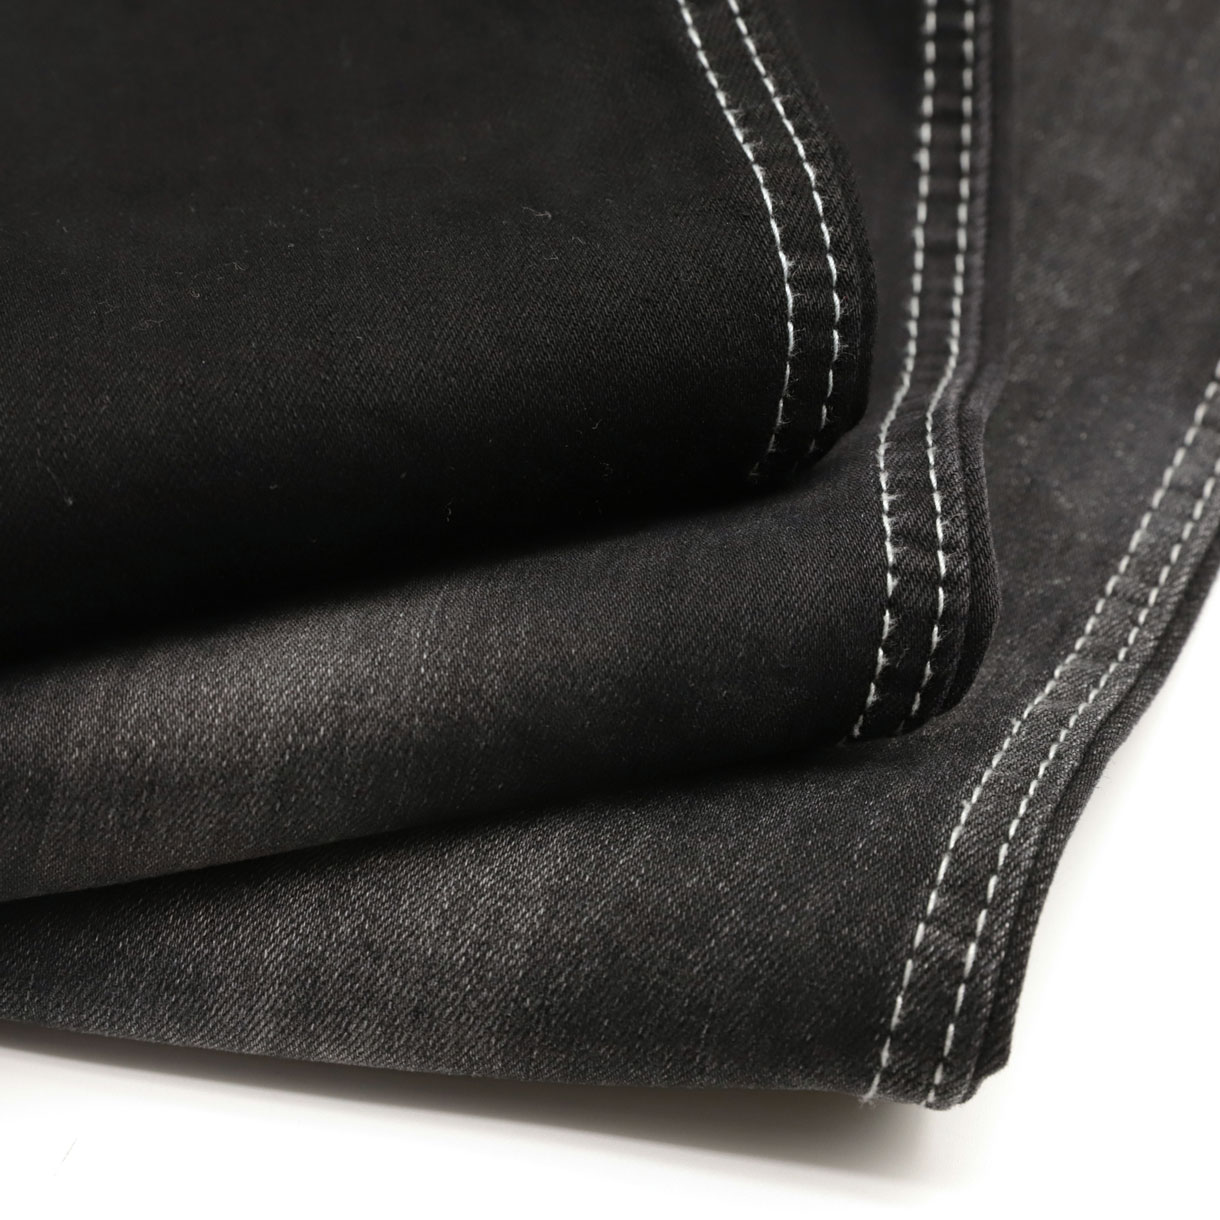 15 Interesting Facts About Denim Fabric 1